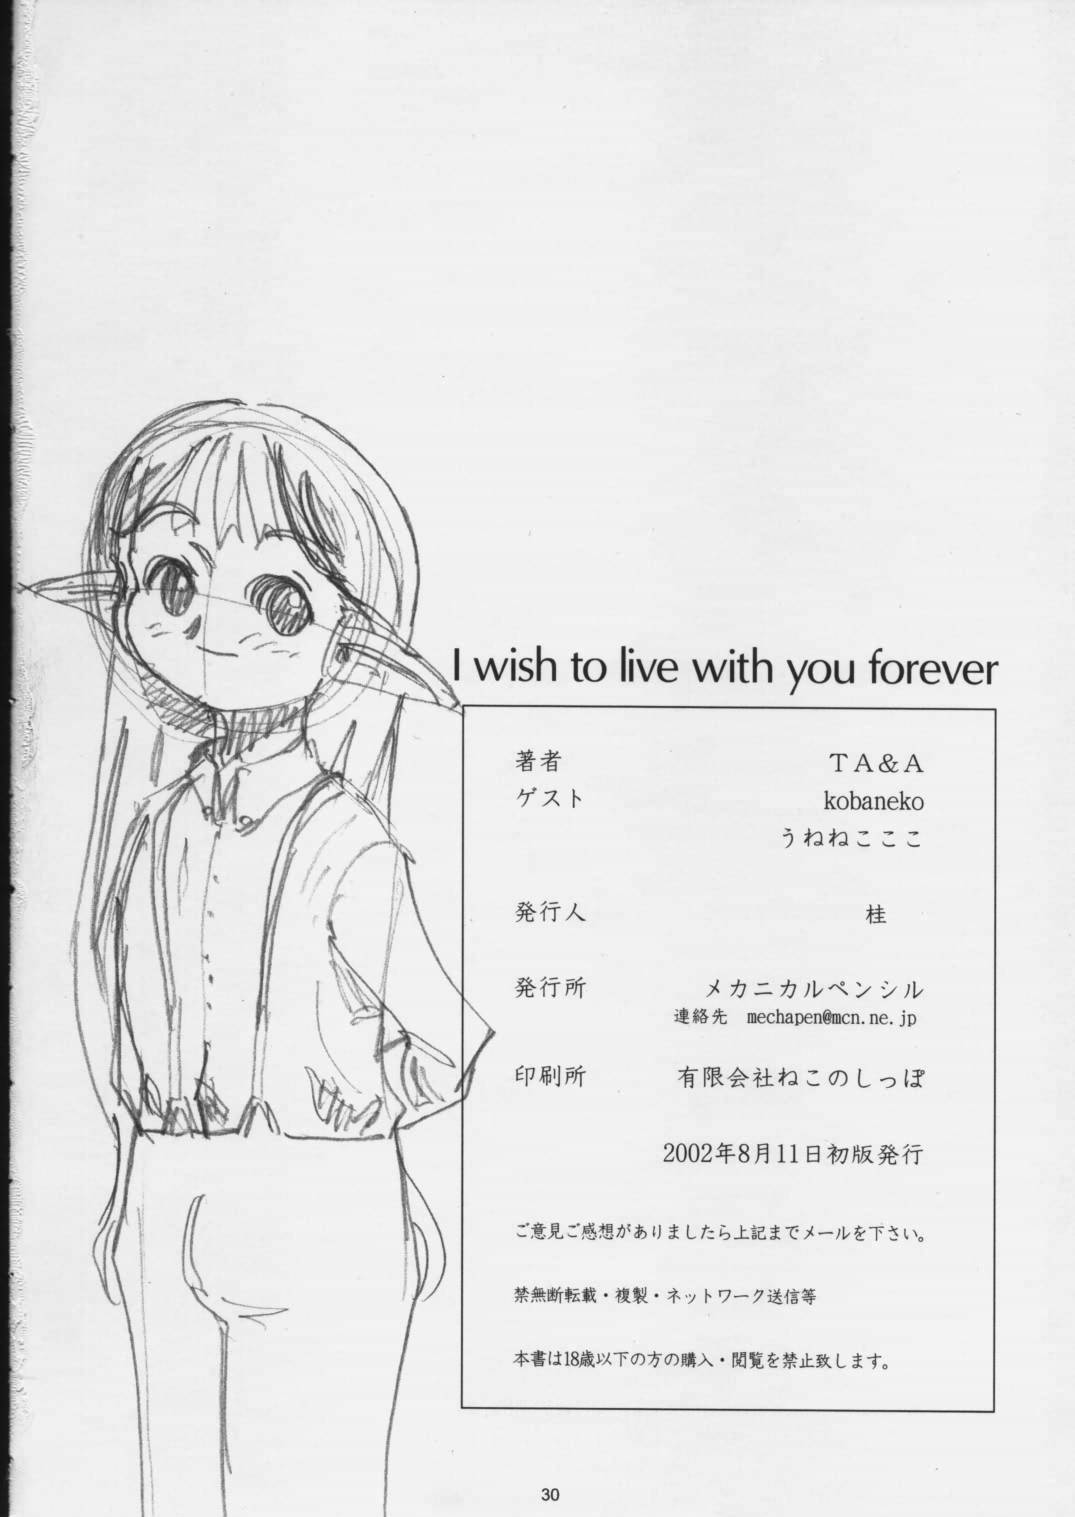 (C62) [メカニカルペンシル (TA＆A)] I wish to live you forever